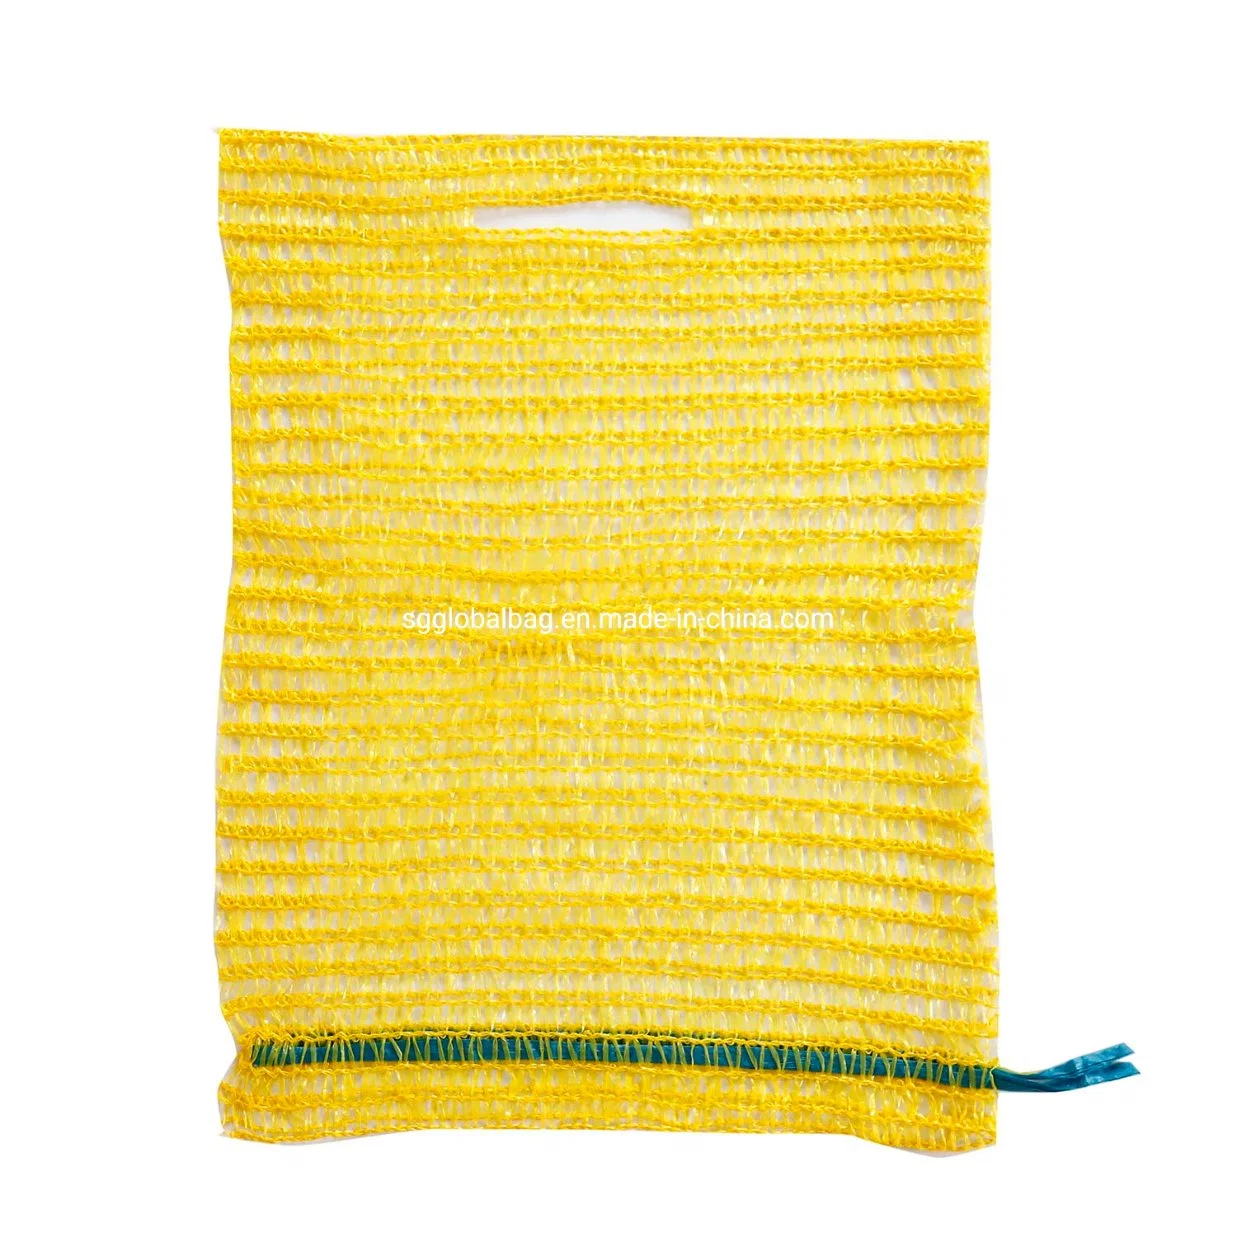 Mesh Bags for Firewood Wholesale Plastic Nets Packaging